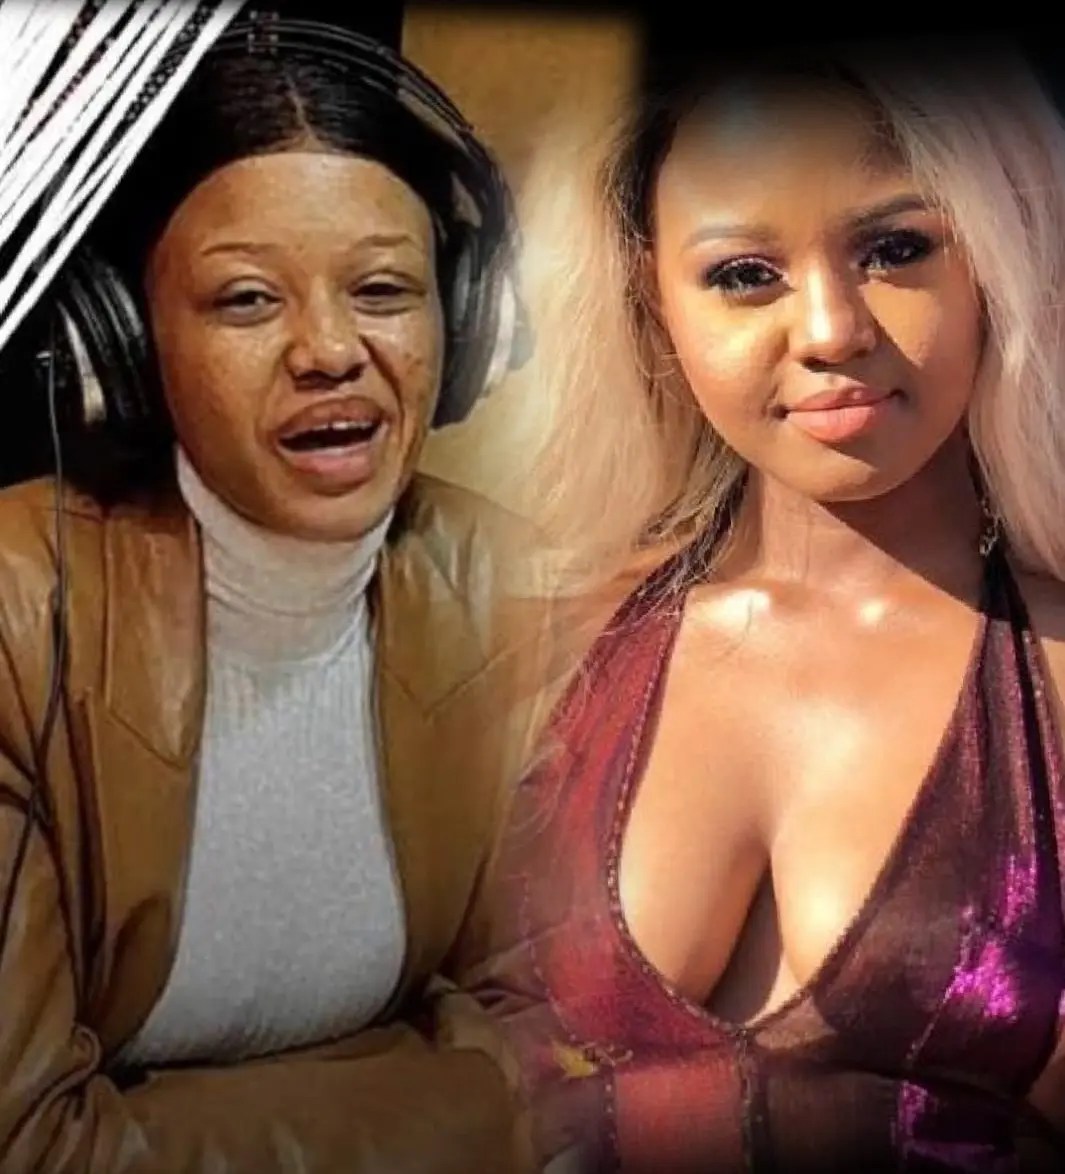 Babes Wodumo finally responds to those criticizing her weight loss